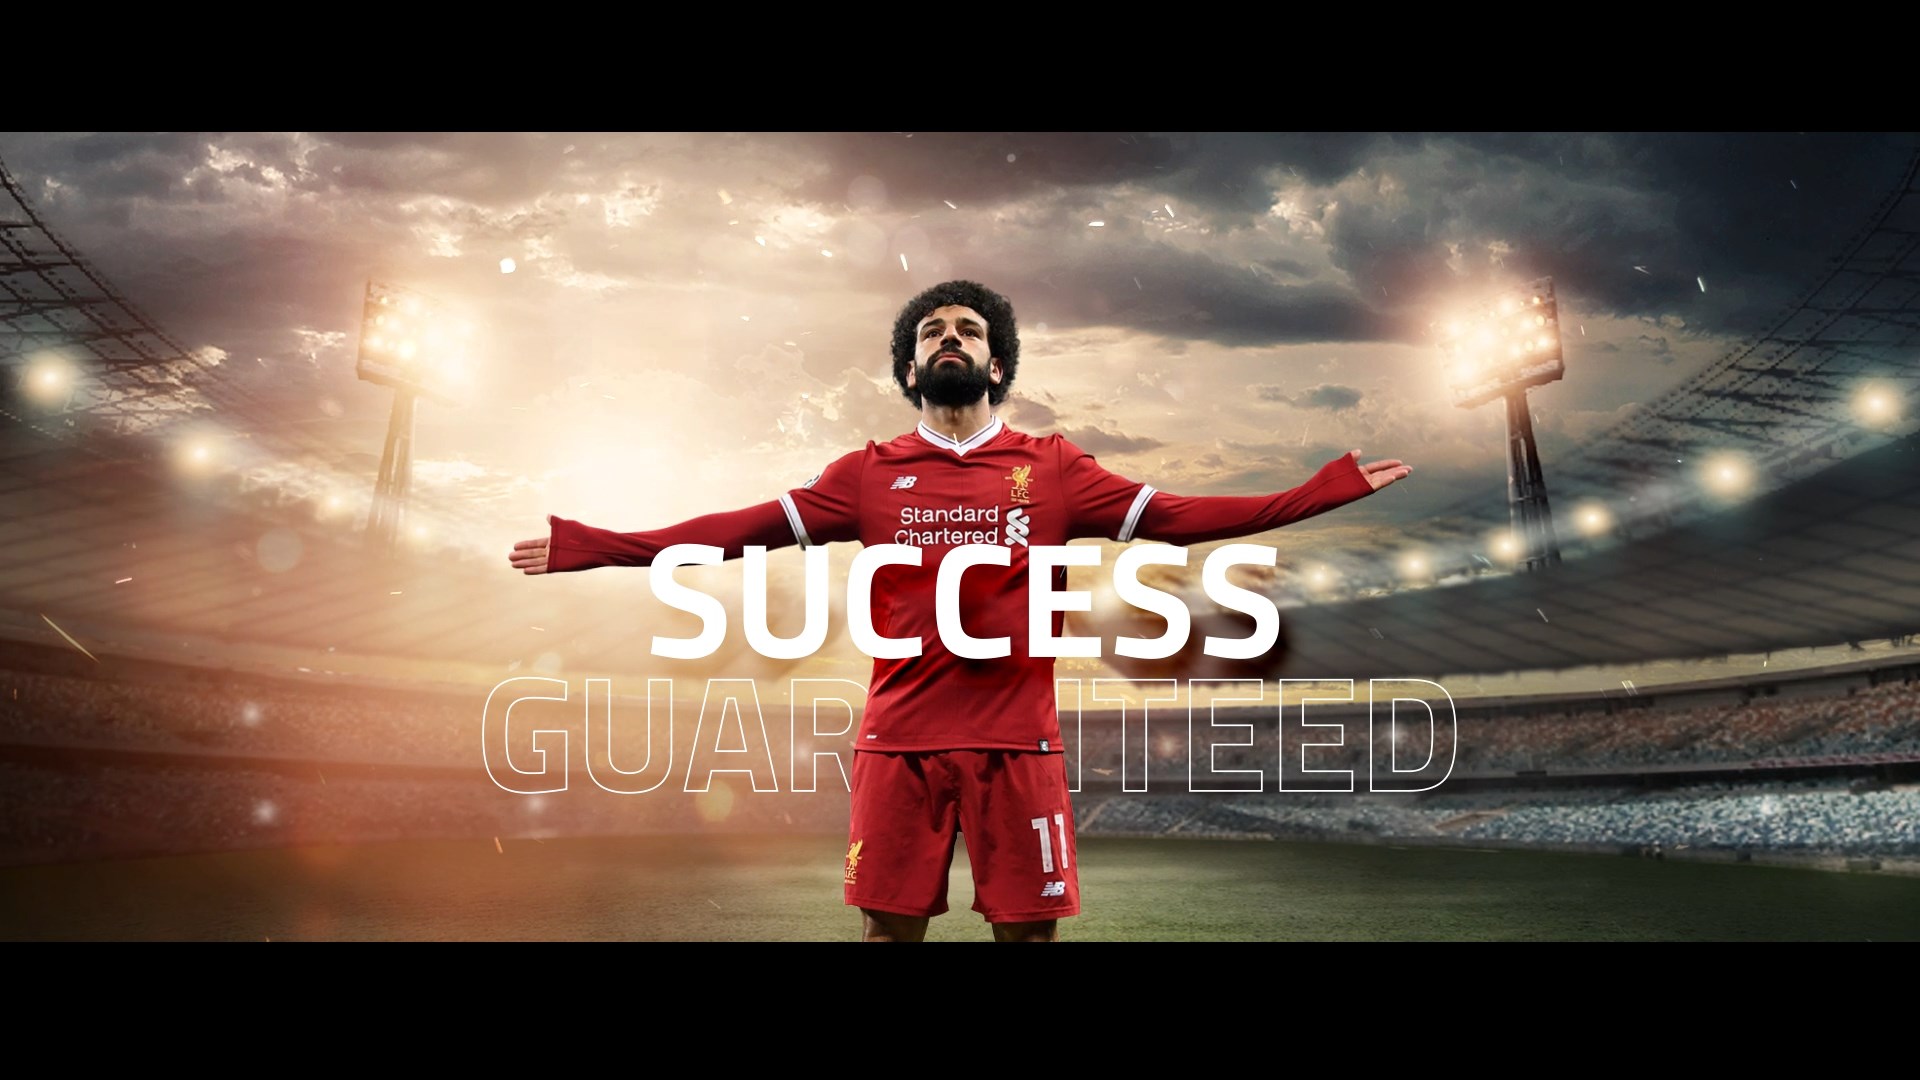 Mohamed Salah Video Animation Creative Campgian Storyboard 2D Animation
Copywriting Graphic Design Manipulation Motion Graphics Visual Effects Voice Over